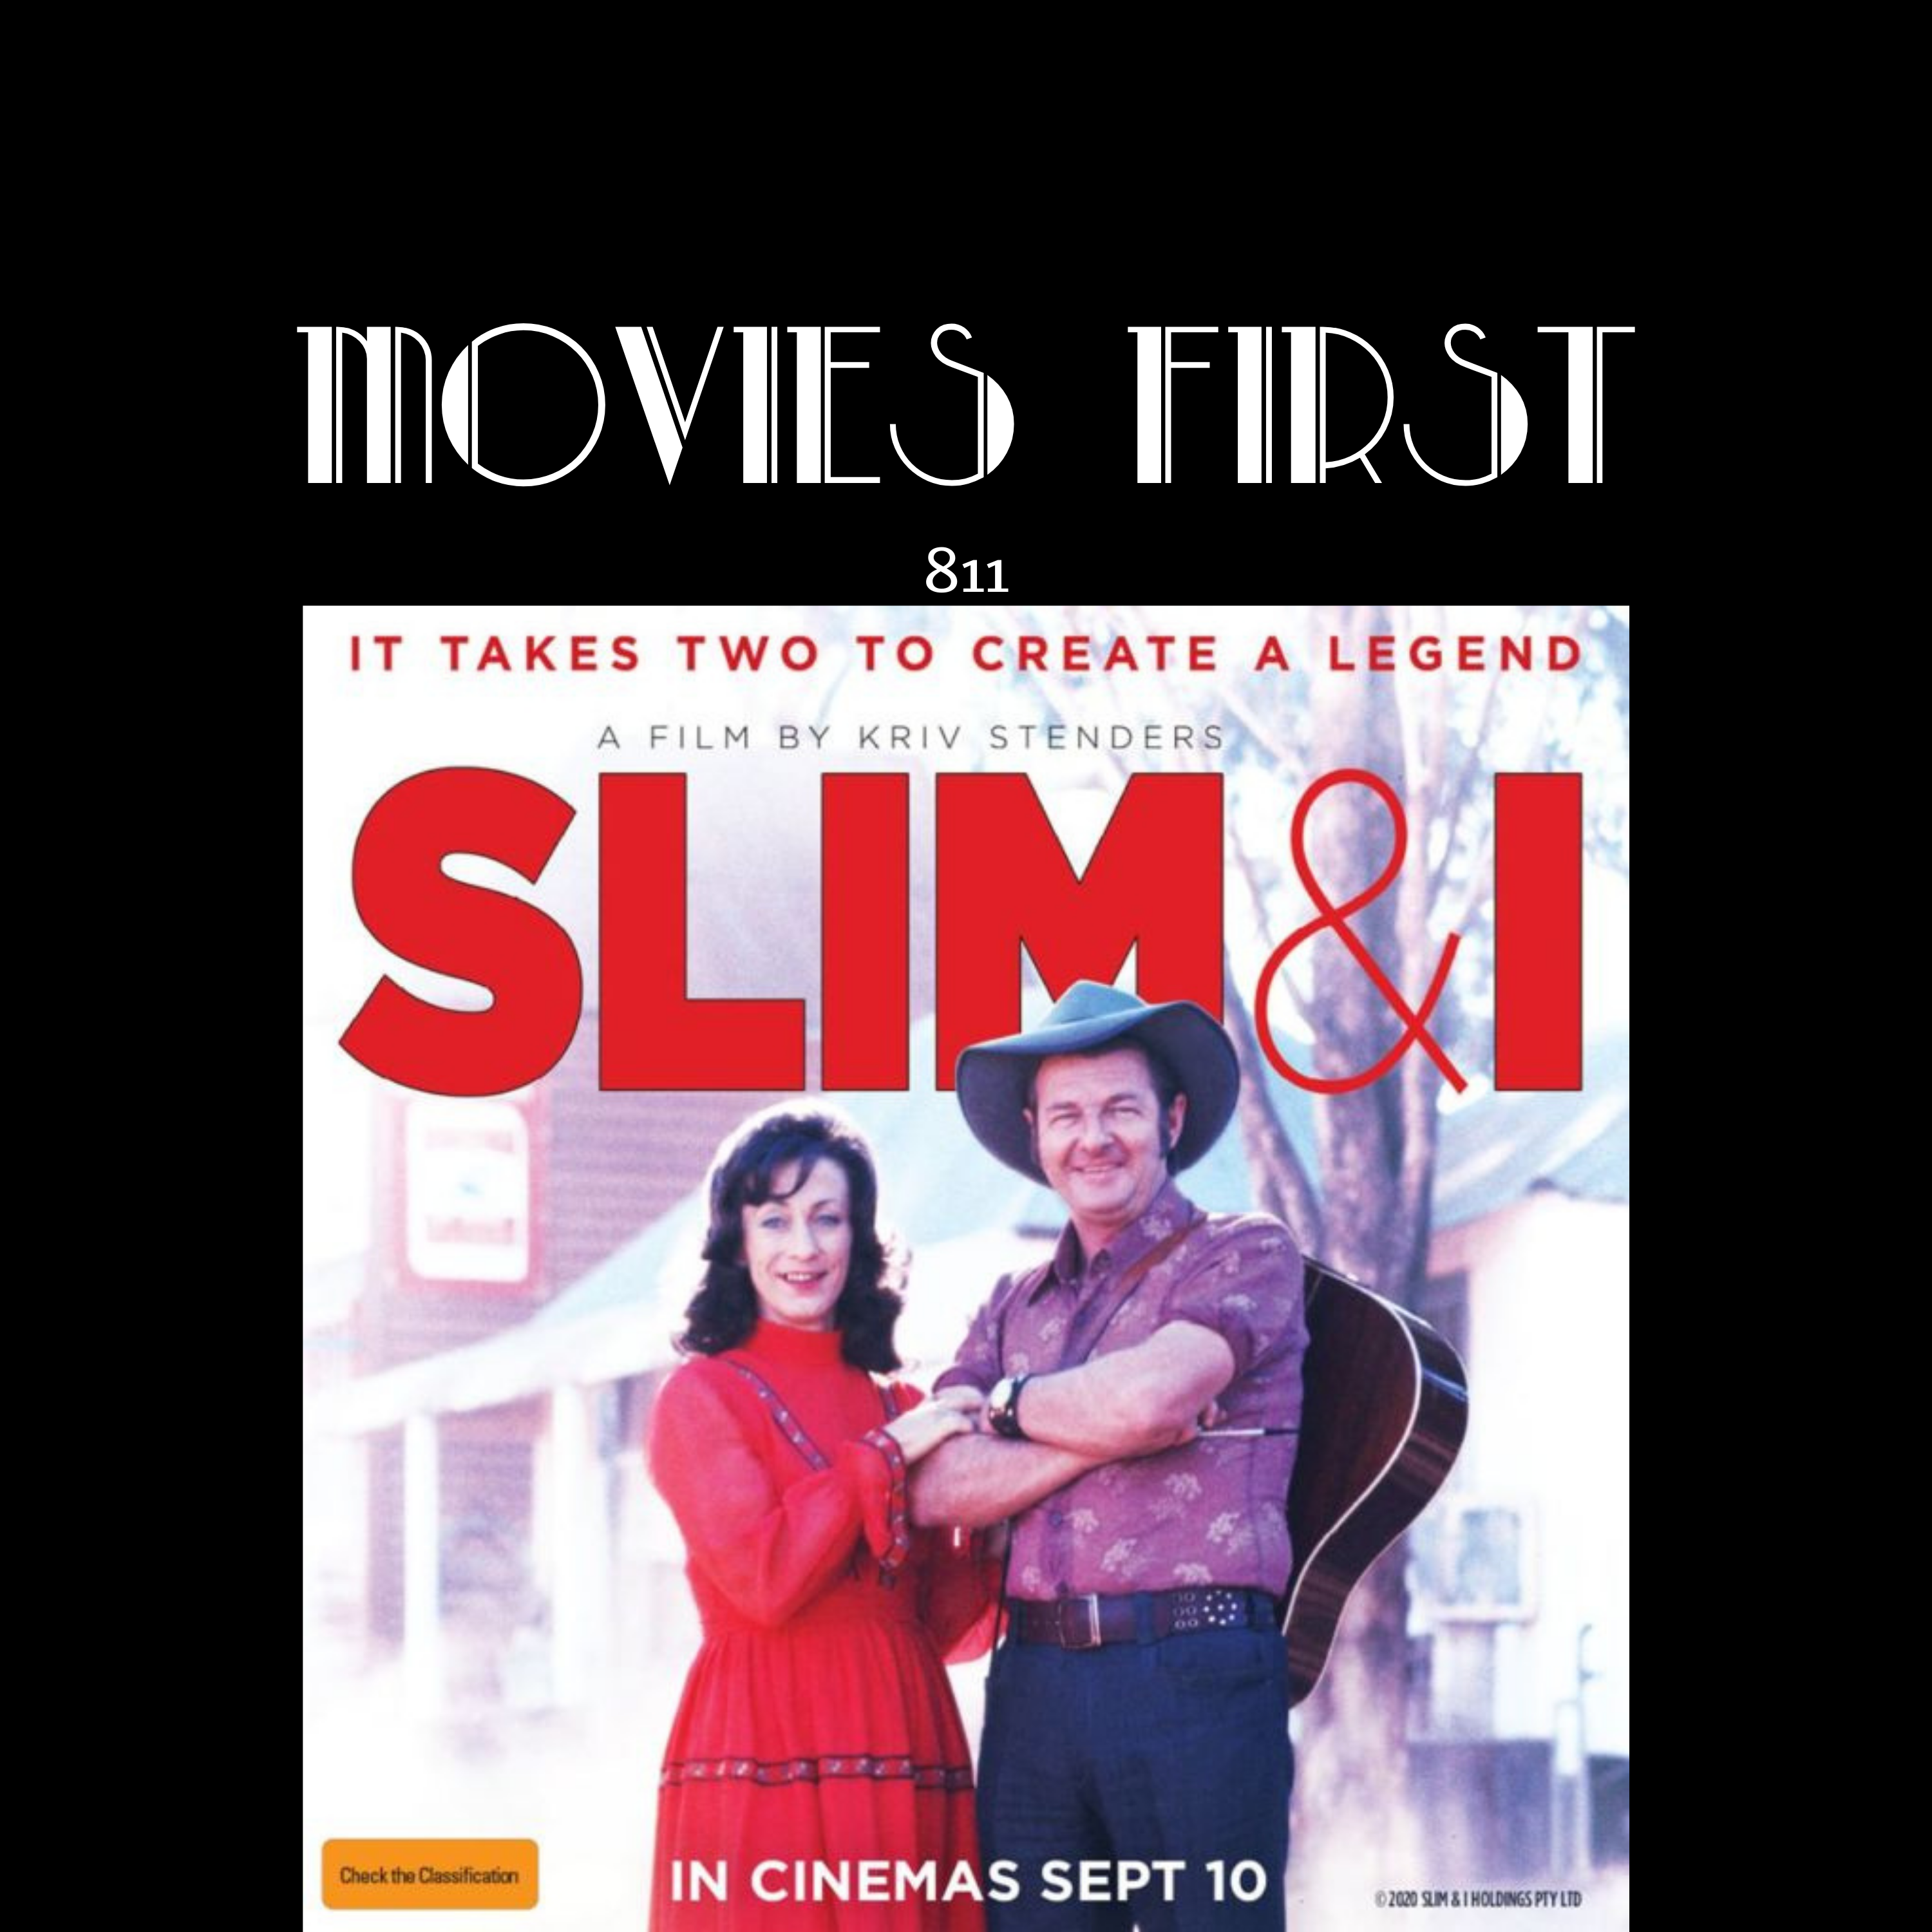 Slim & I (Documentary) (the @MoviesFirst review)